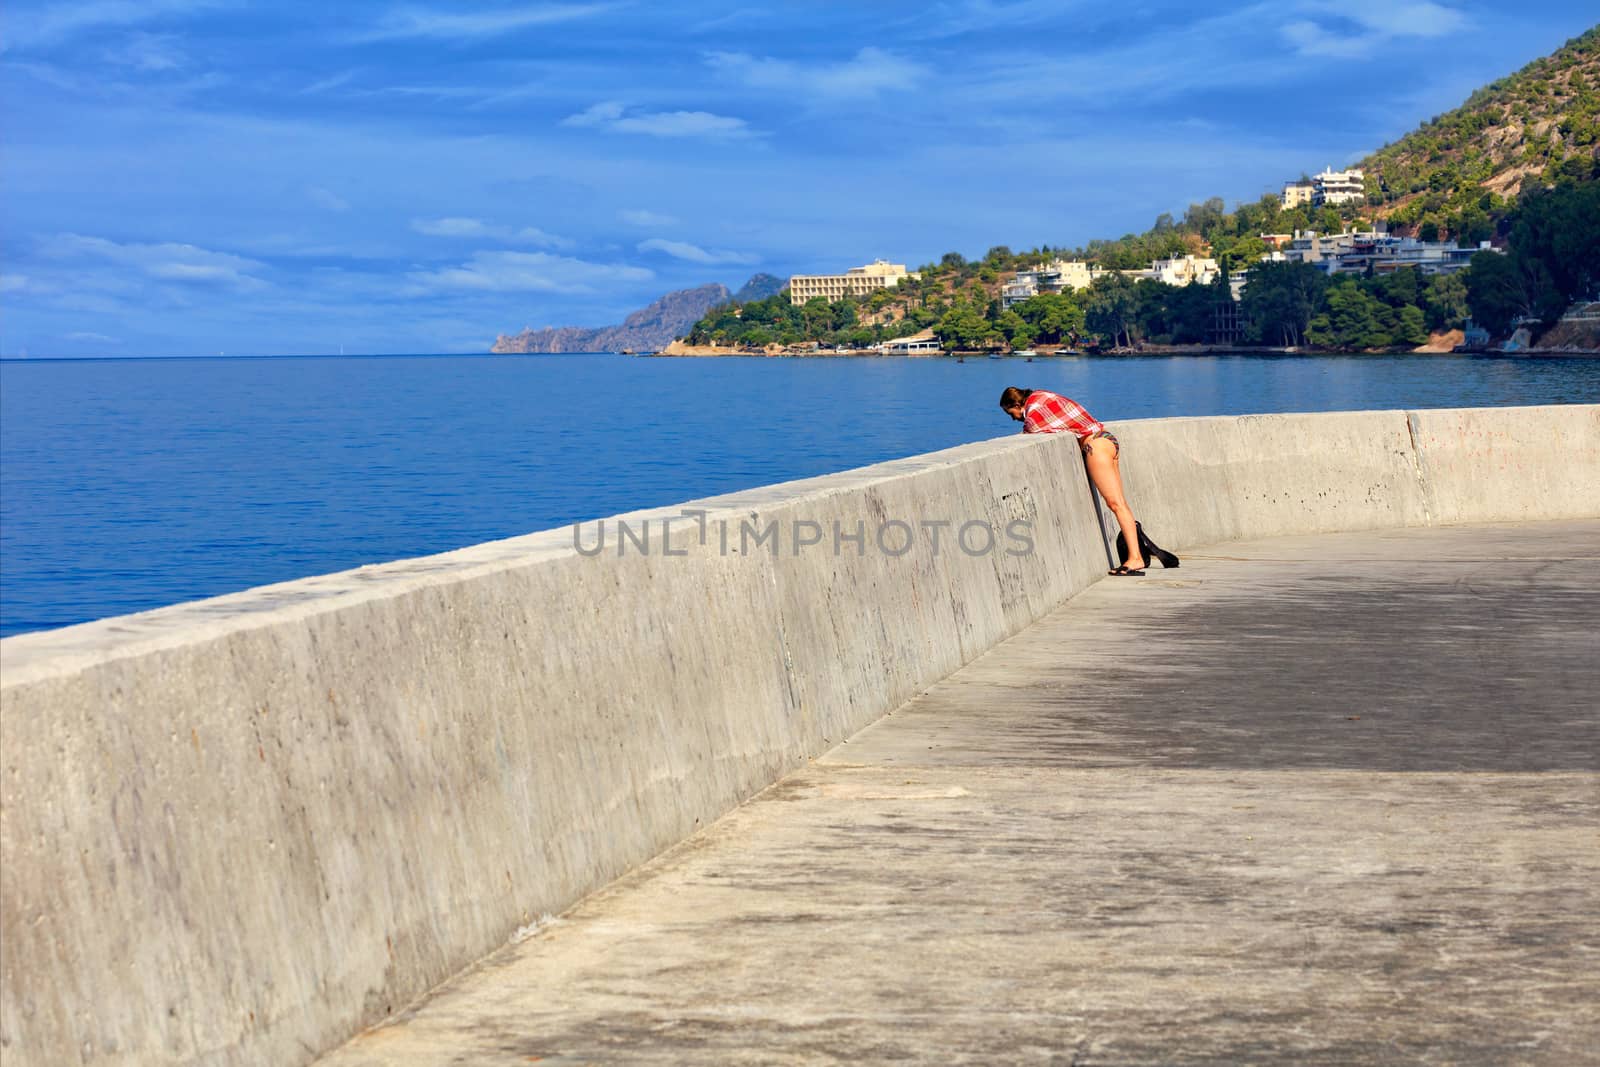 On the concrete pier of the sea bay, a lady in a beach suit observes the life of marine coastal fish and inhabitants against the backdrop of a receding perspective of the sea coastline and the hillside, image with copy space.